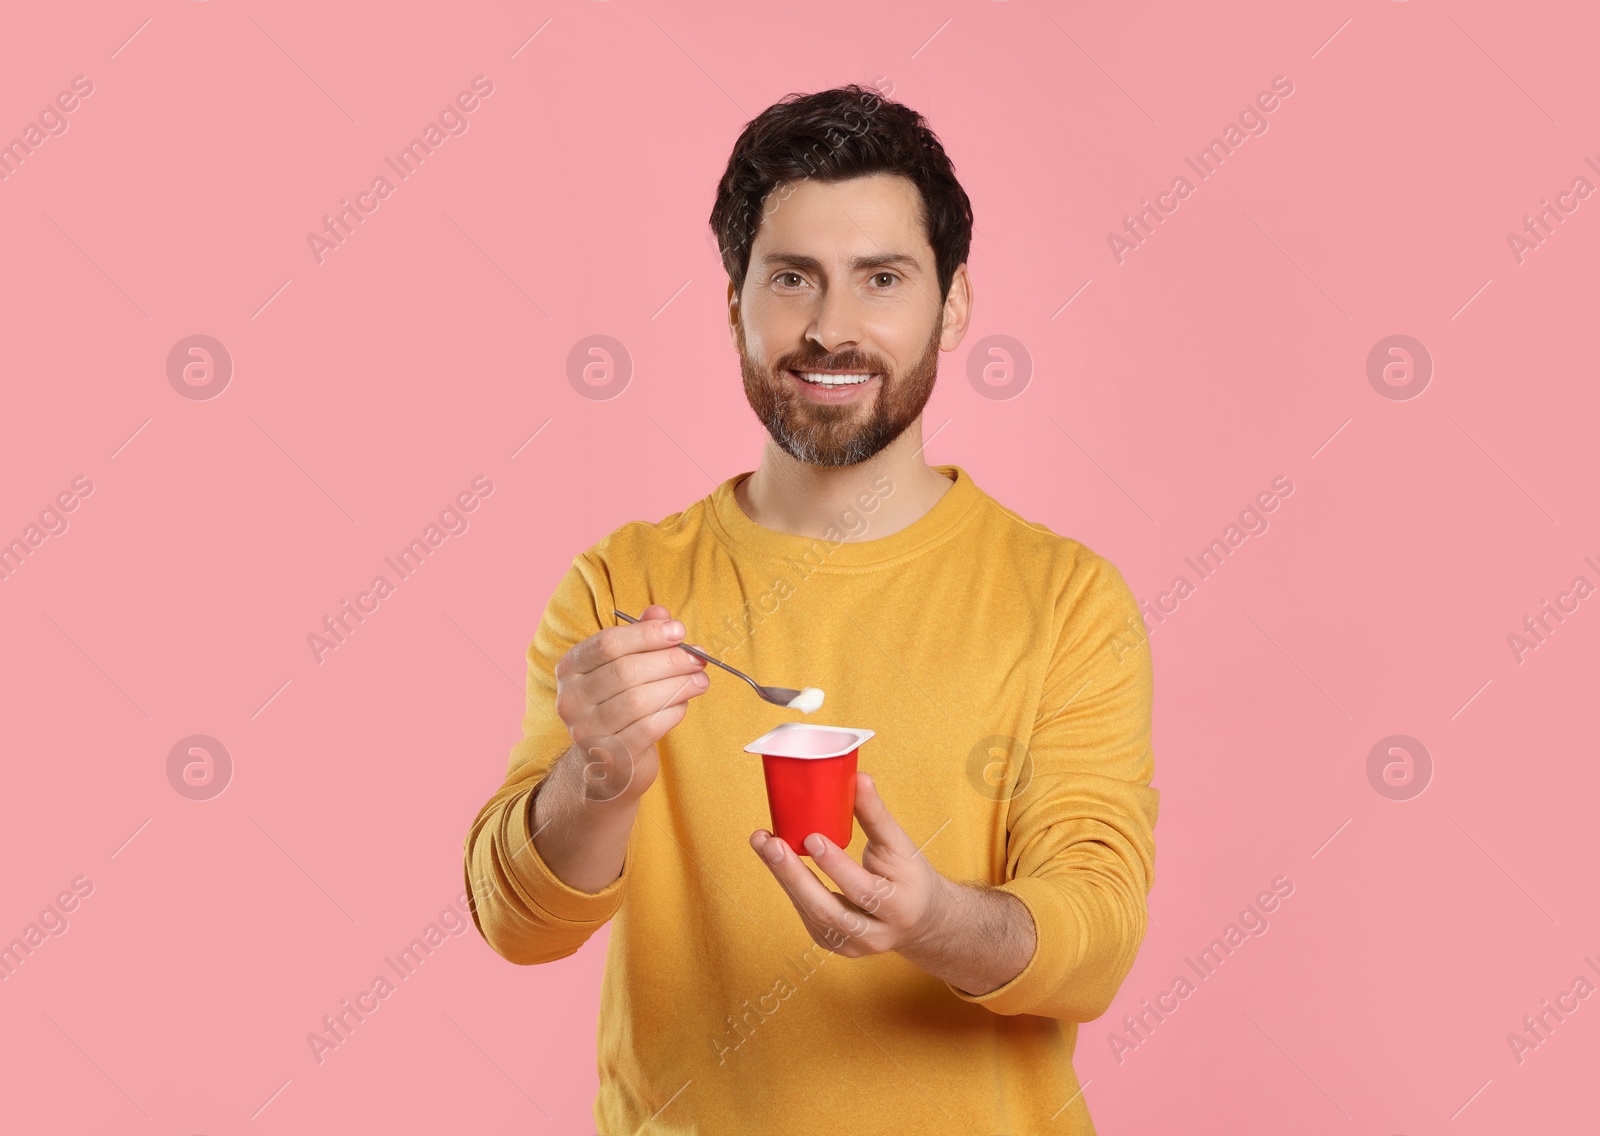 Photo of Handsome man with delicious yogurt and spoon on pink background